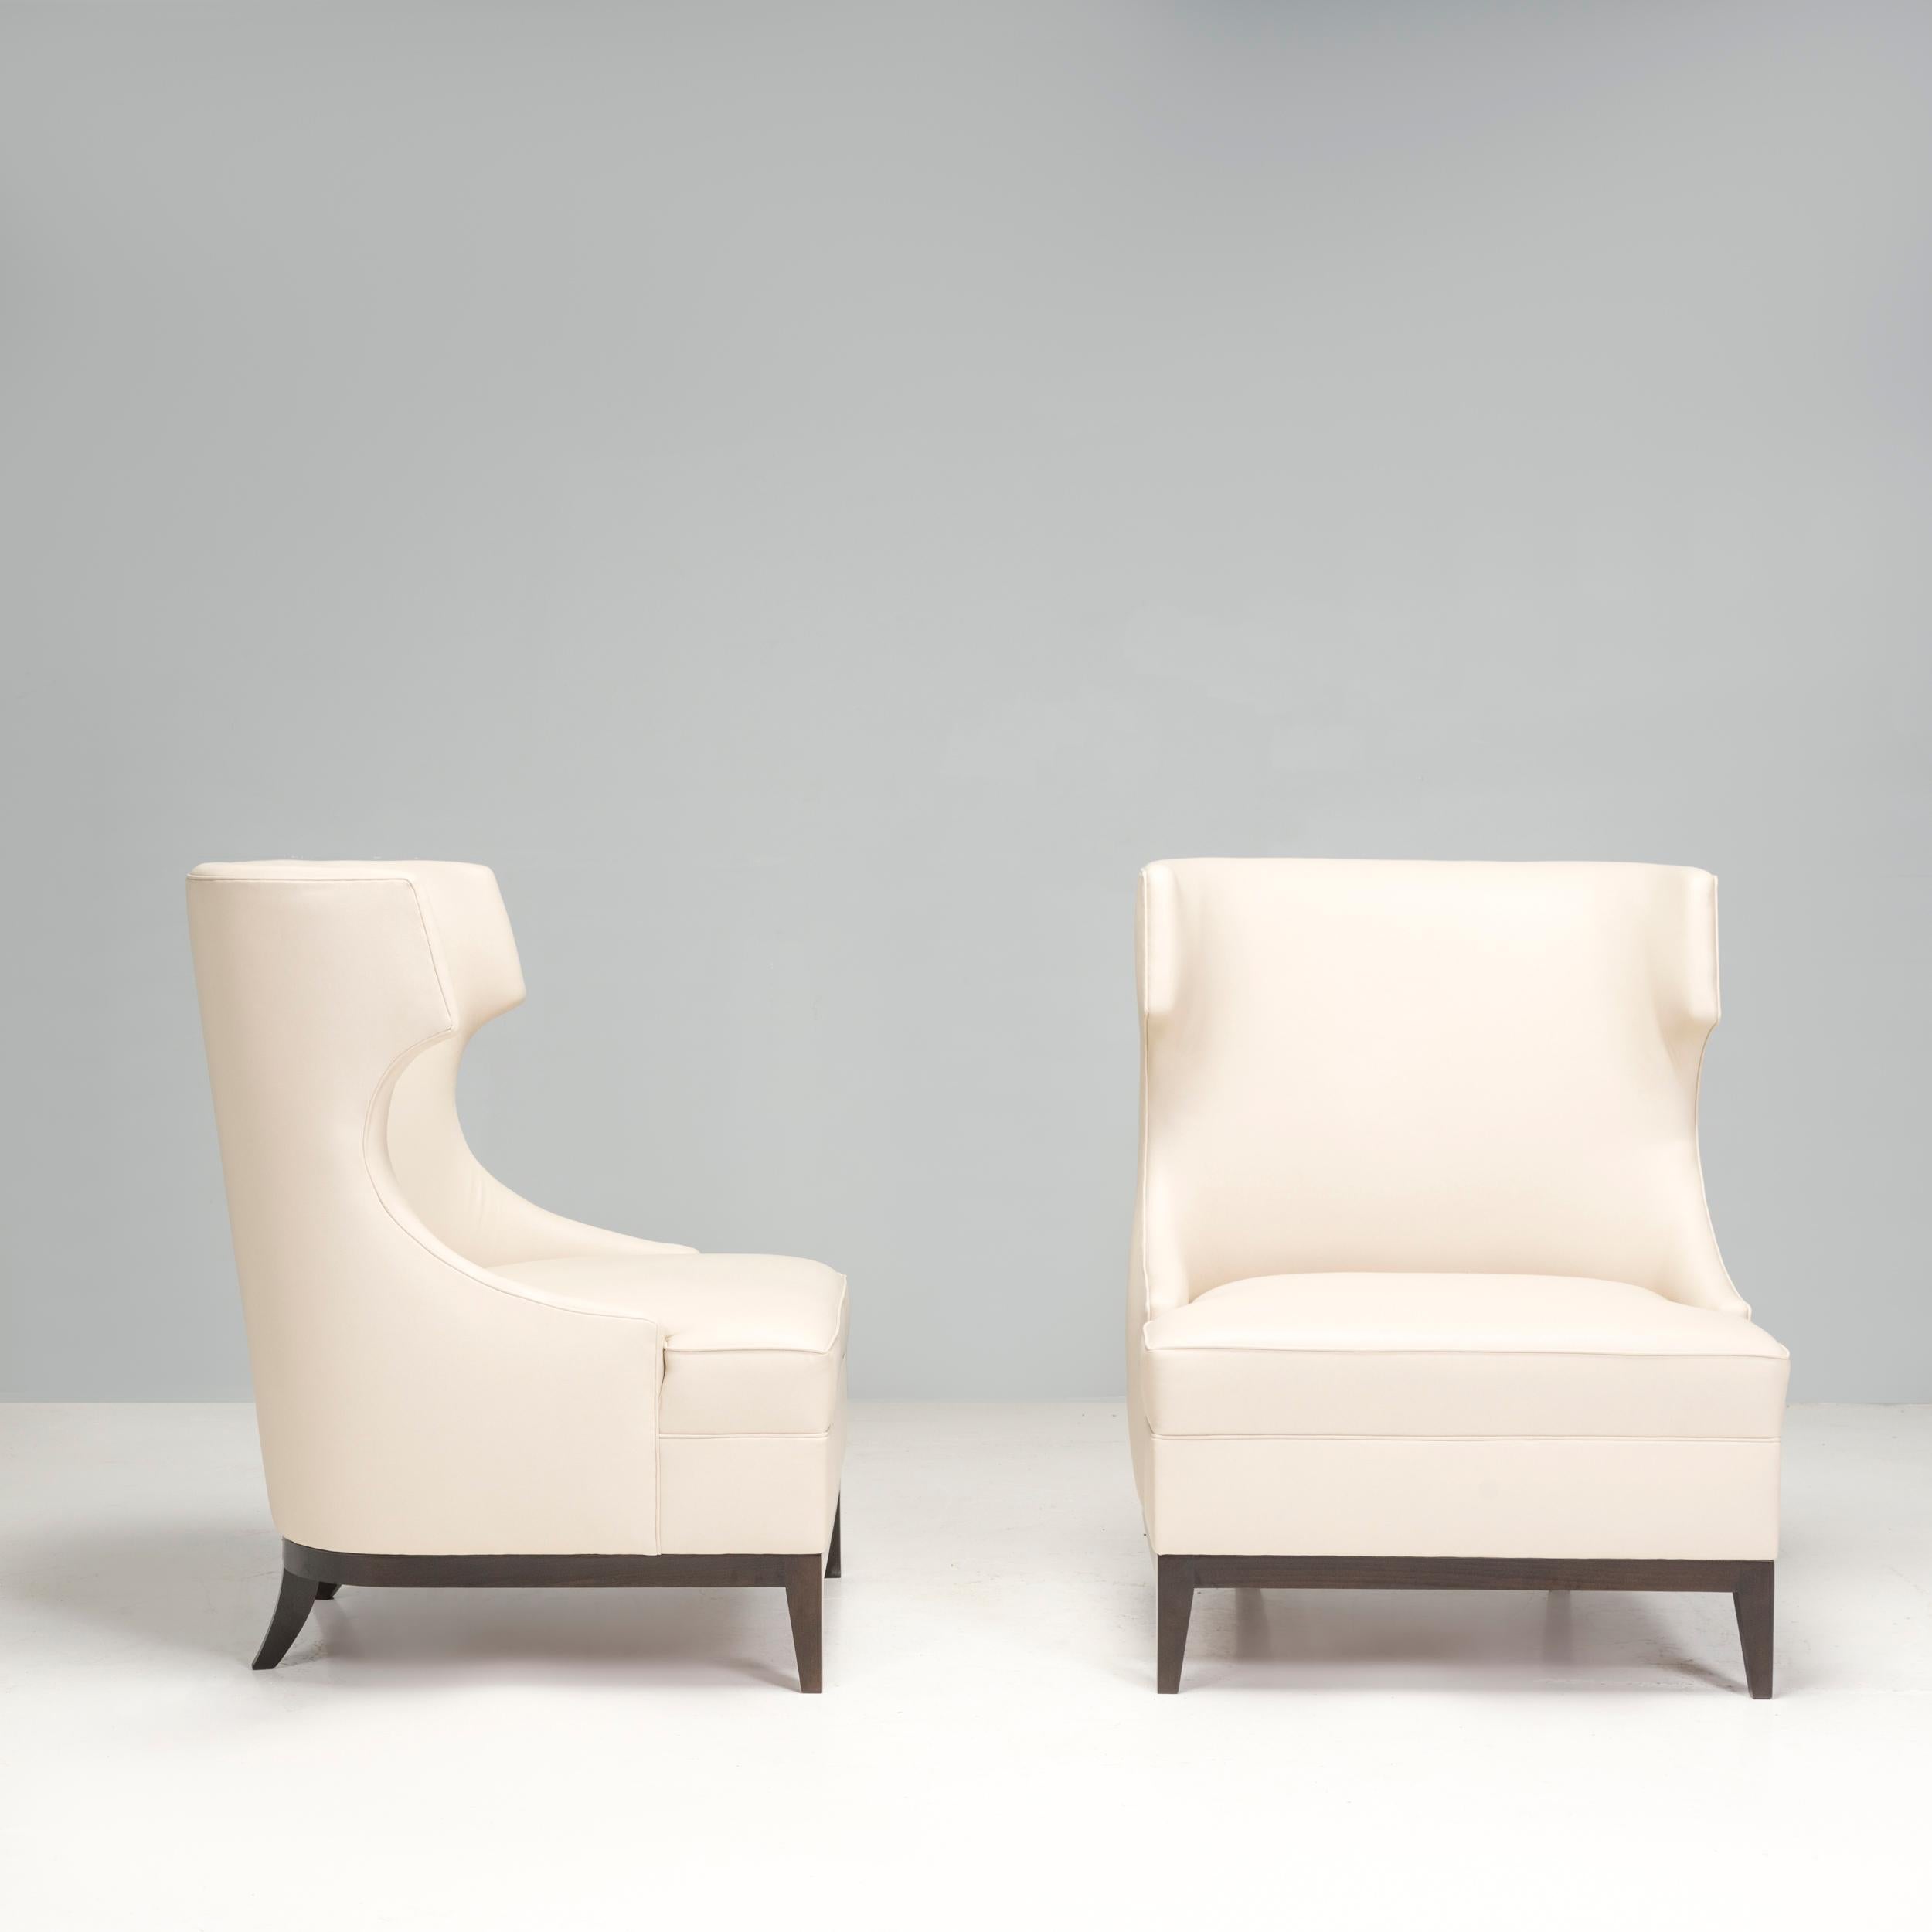 British Bespoke Cream Leather High Back Wingback Armchairs, Set of Two For Sale